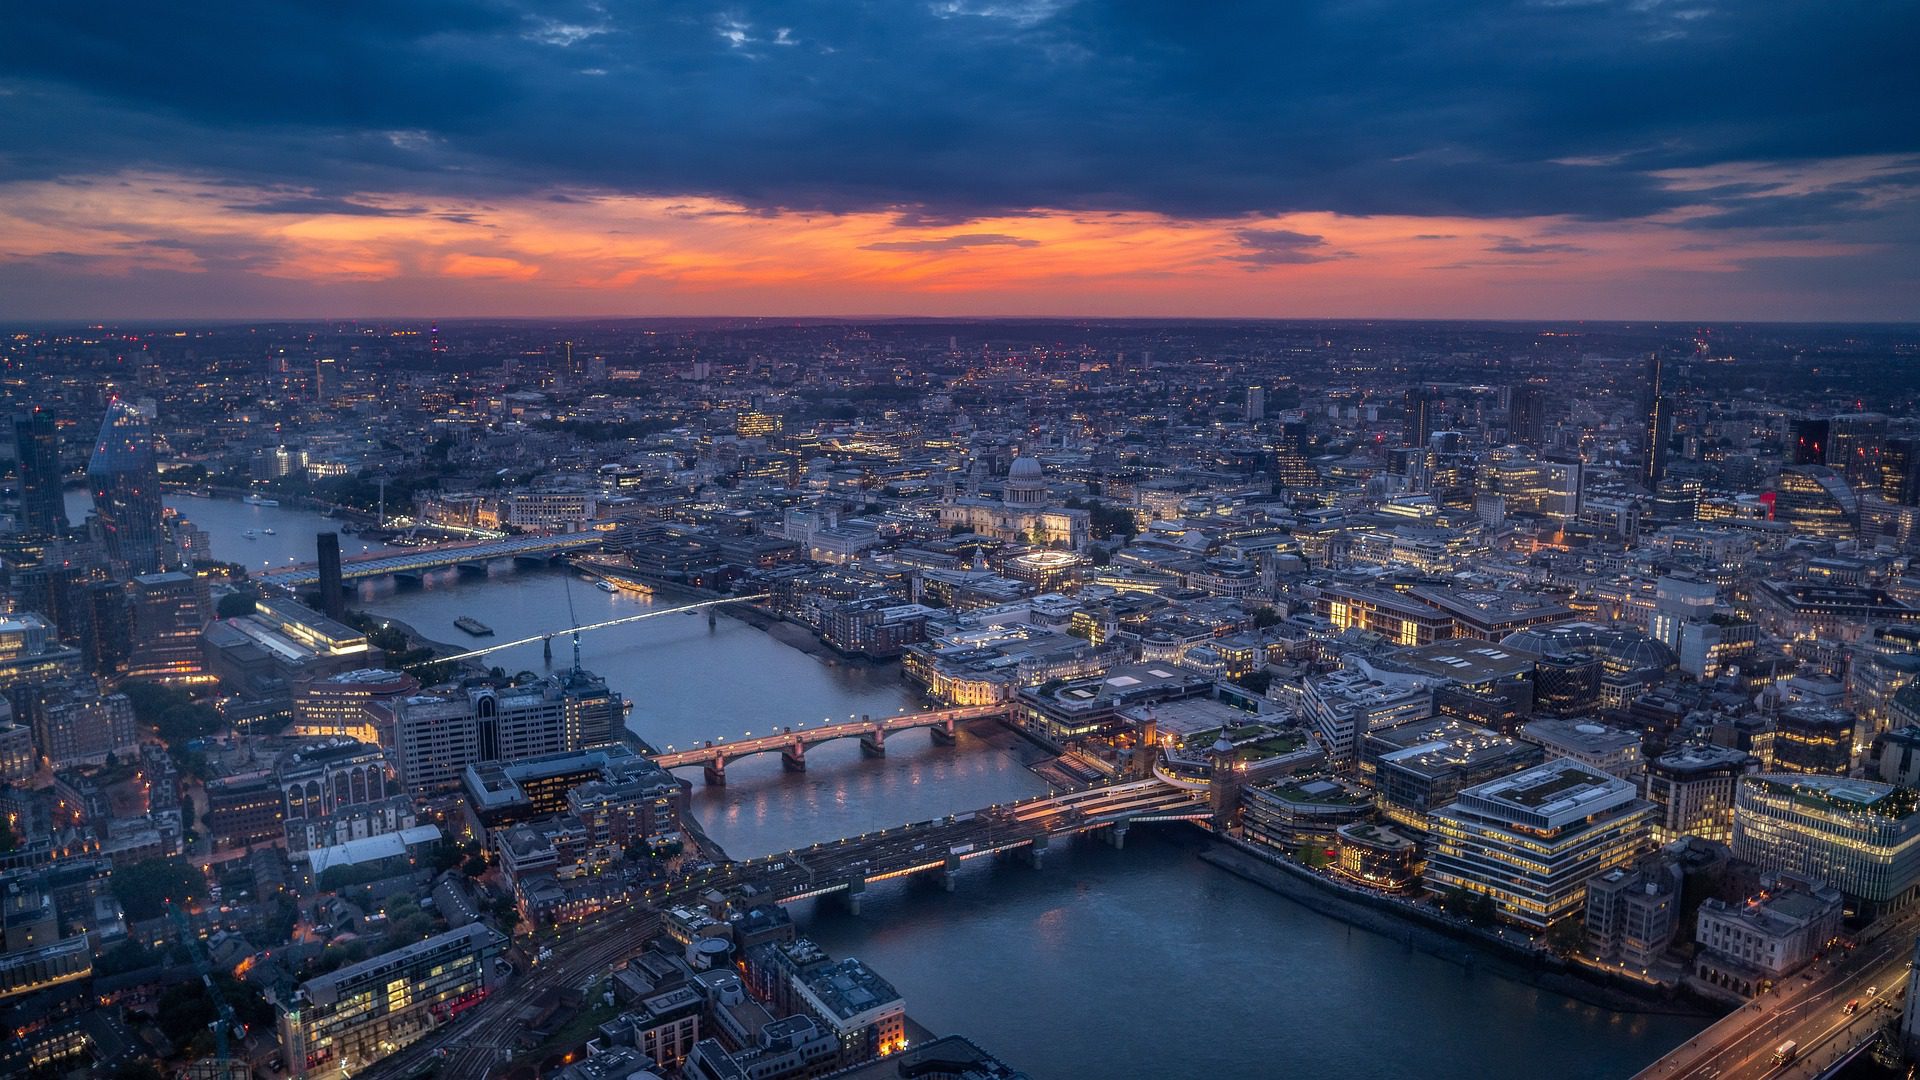 Views over London - image by Pierre Blaché